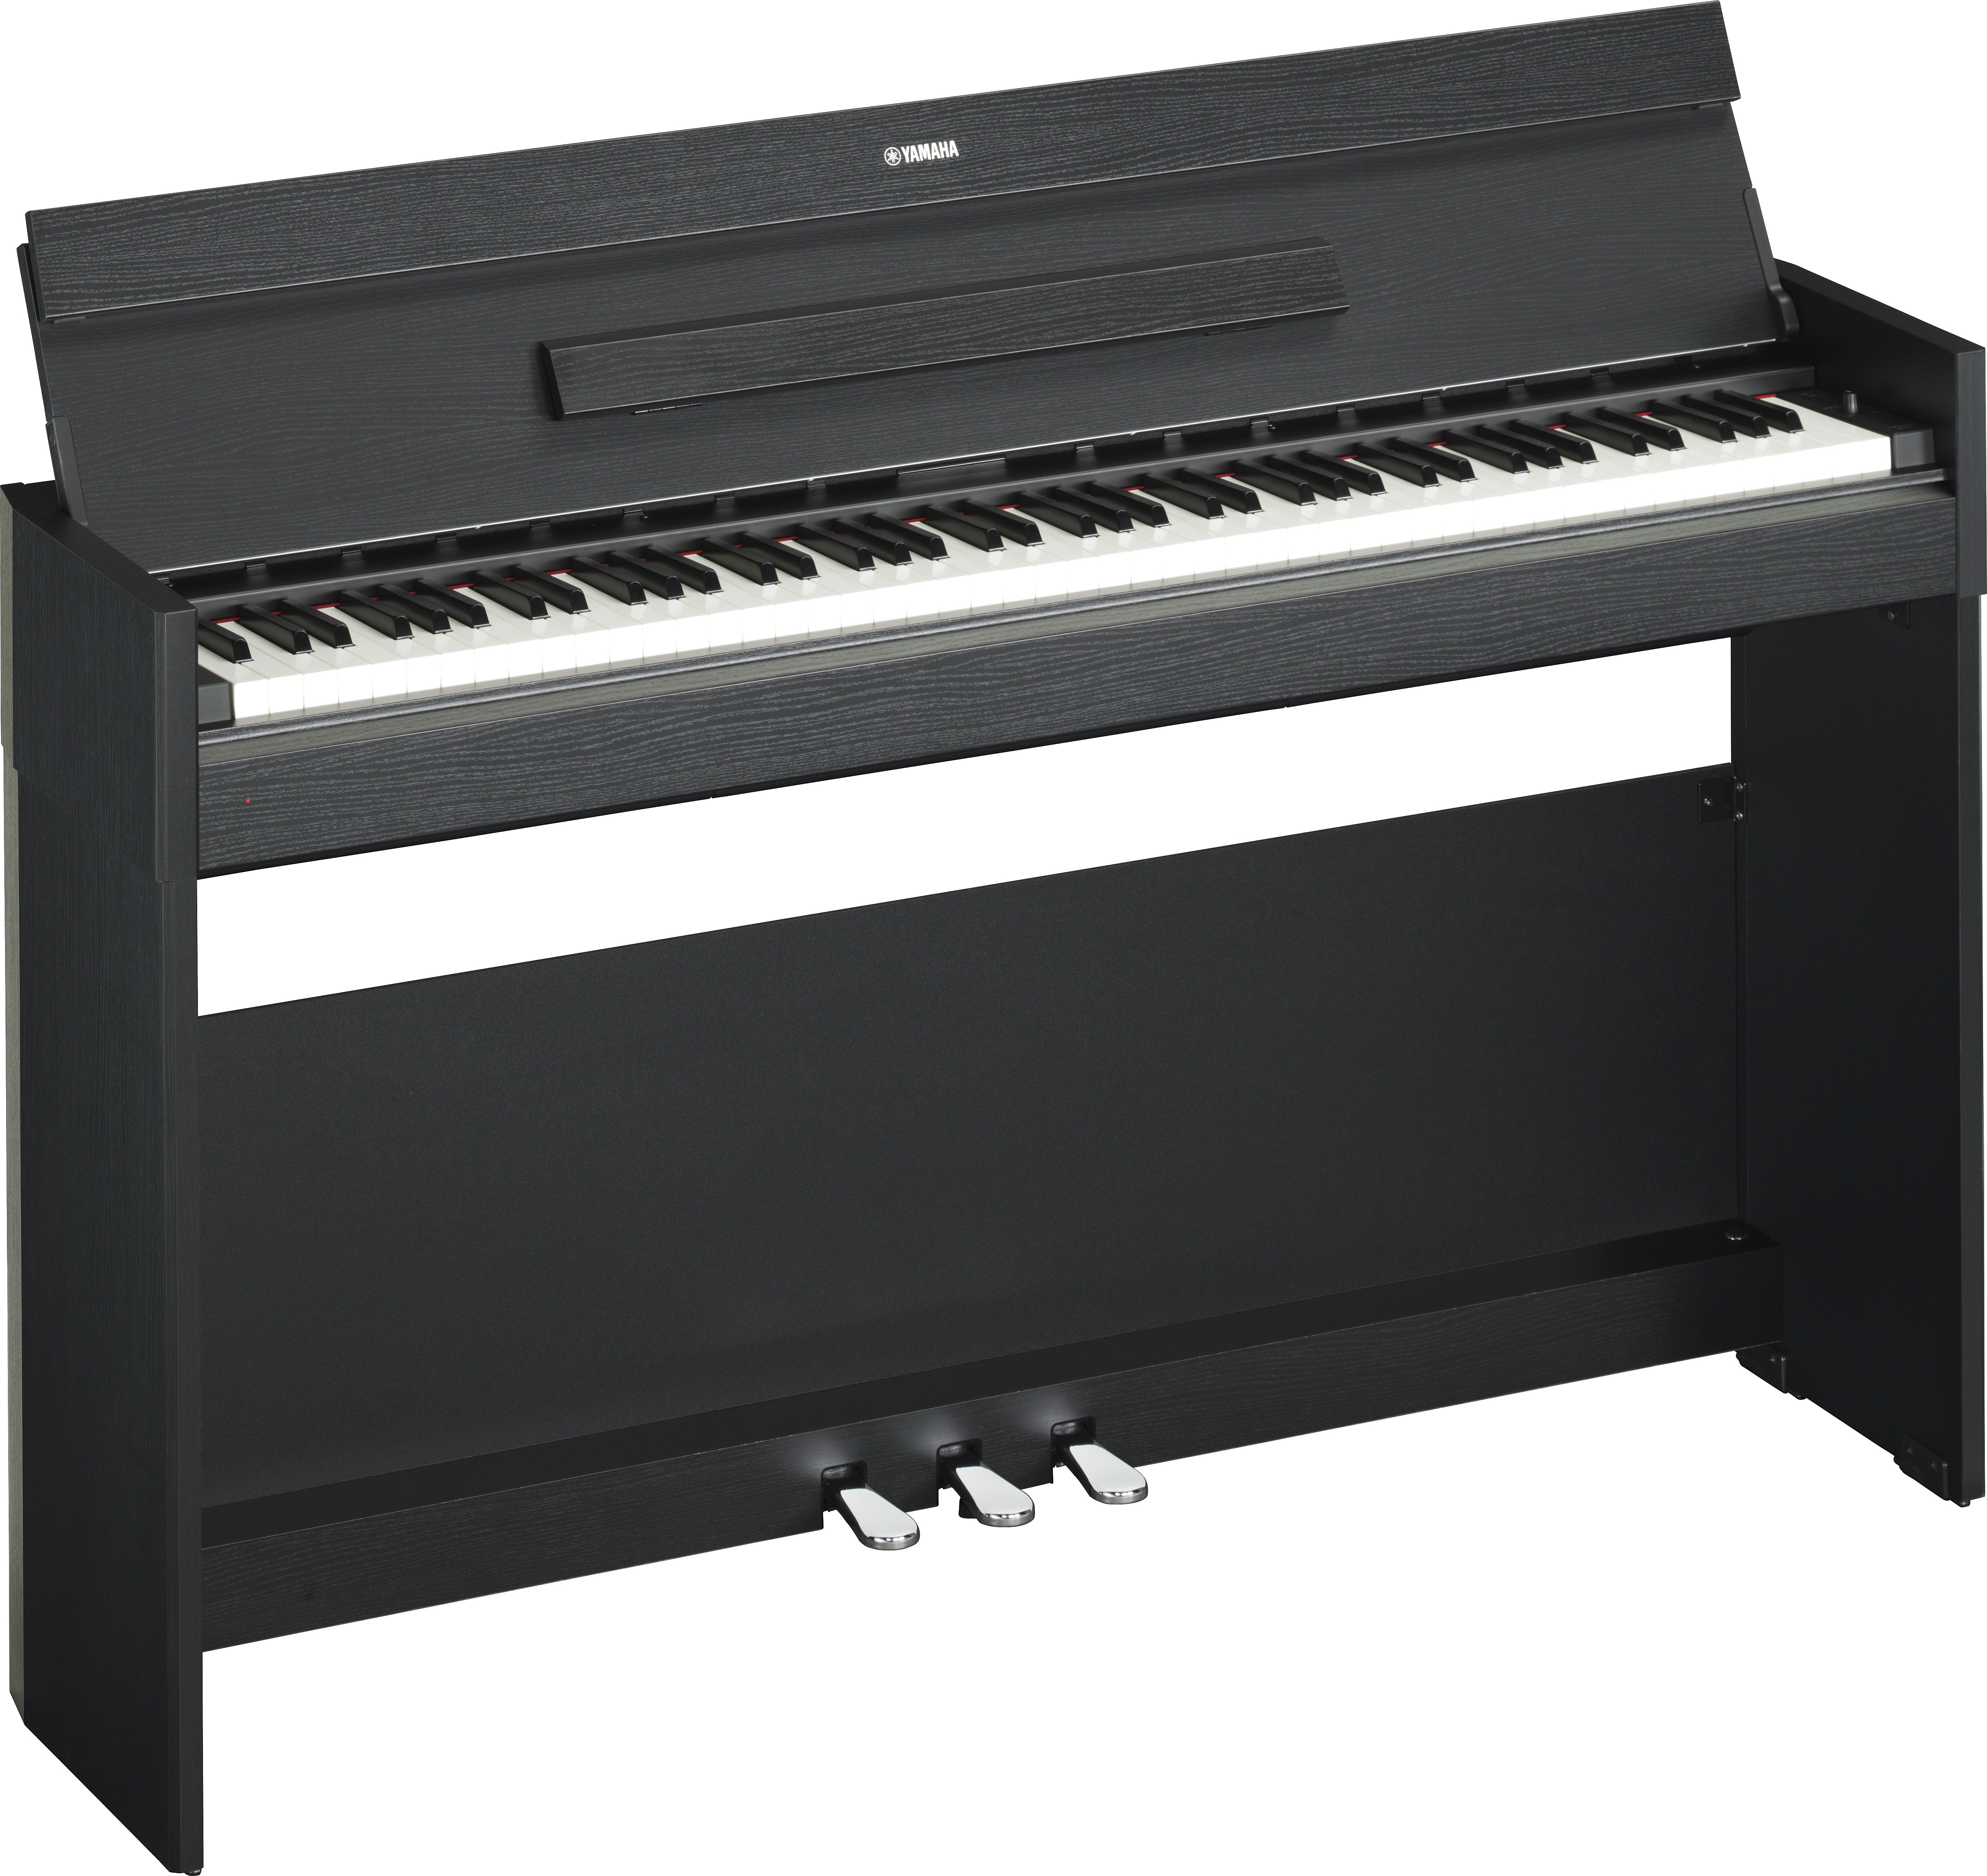 YDP-S52 - Specs - ARIUS - Pianos - Musical Instruments - Products 